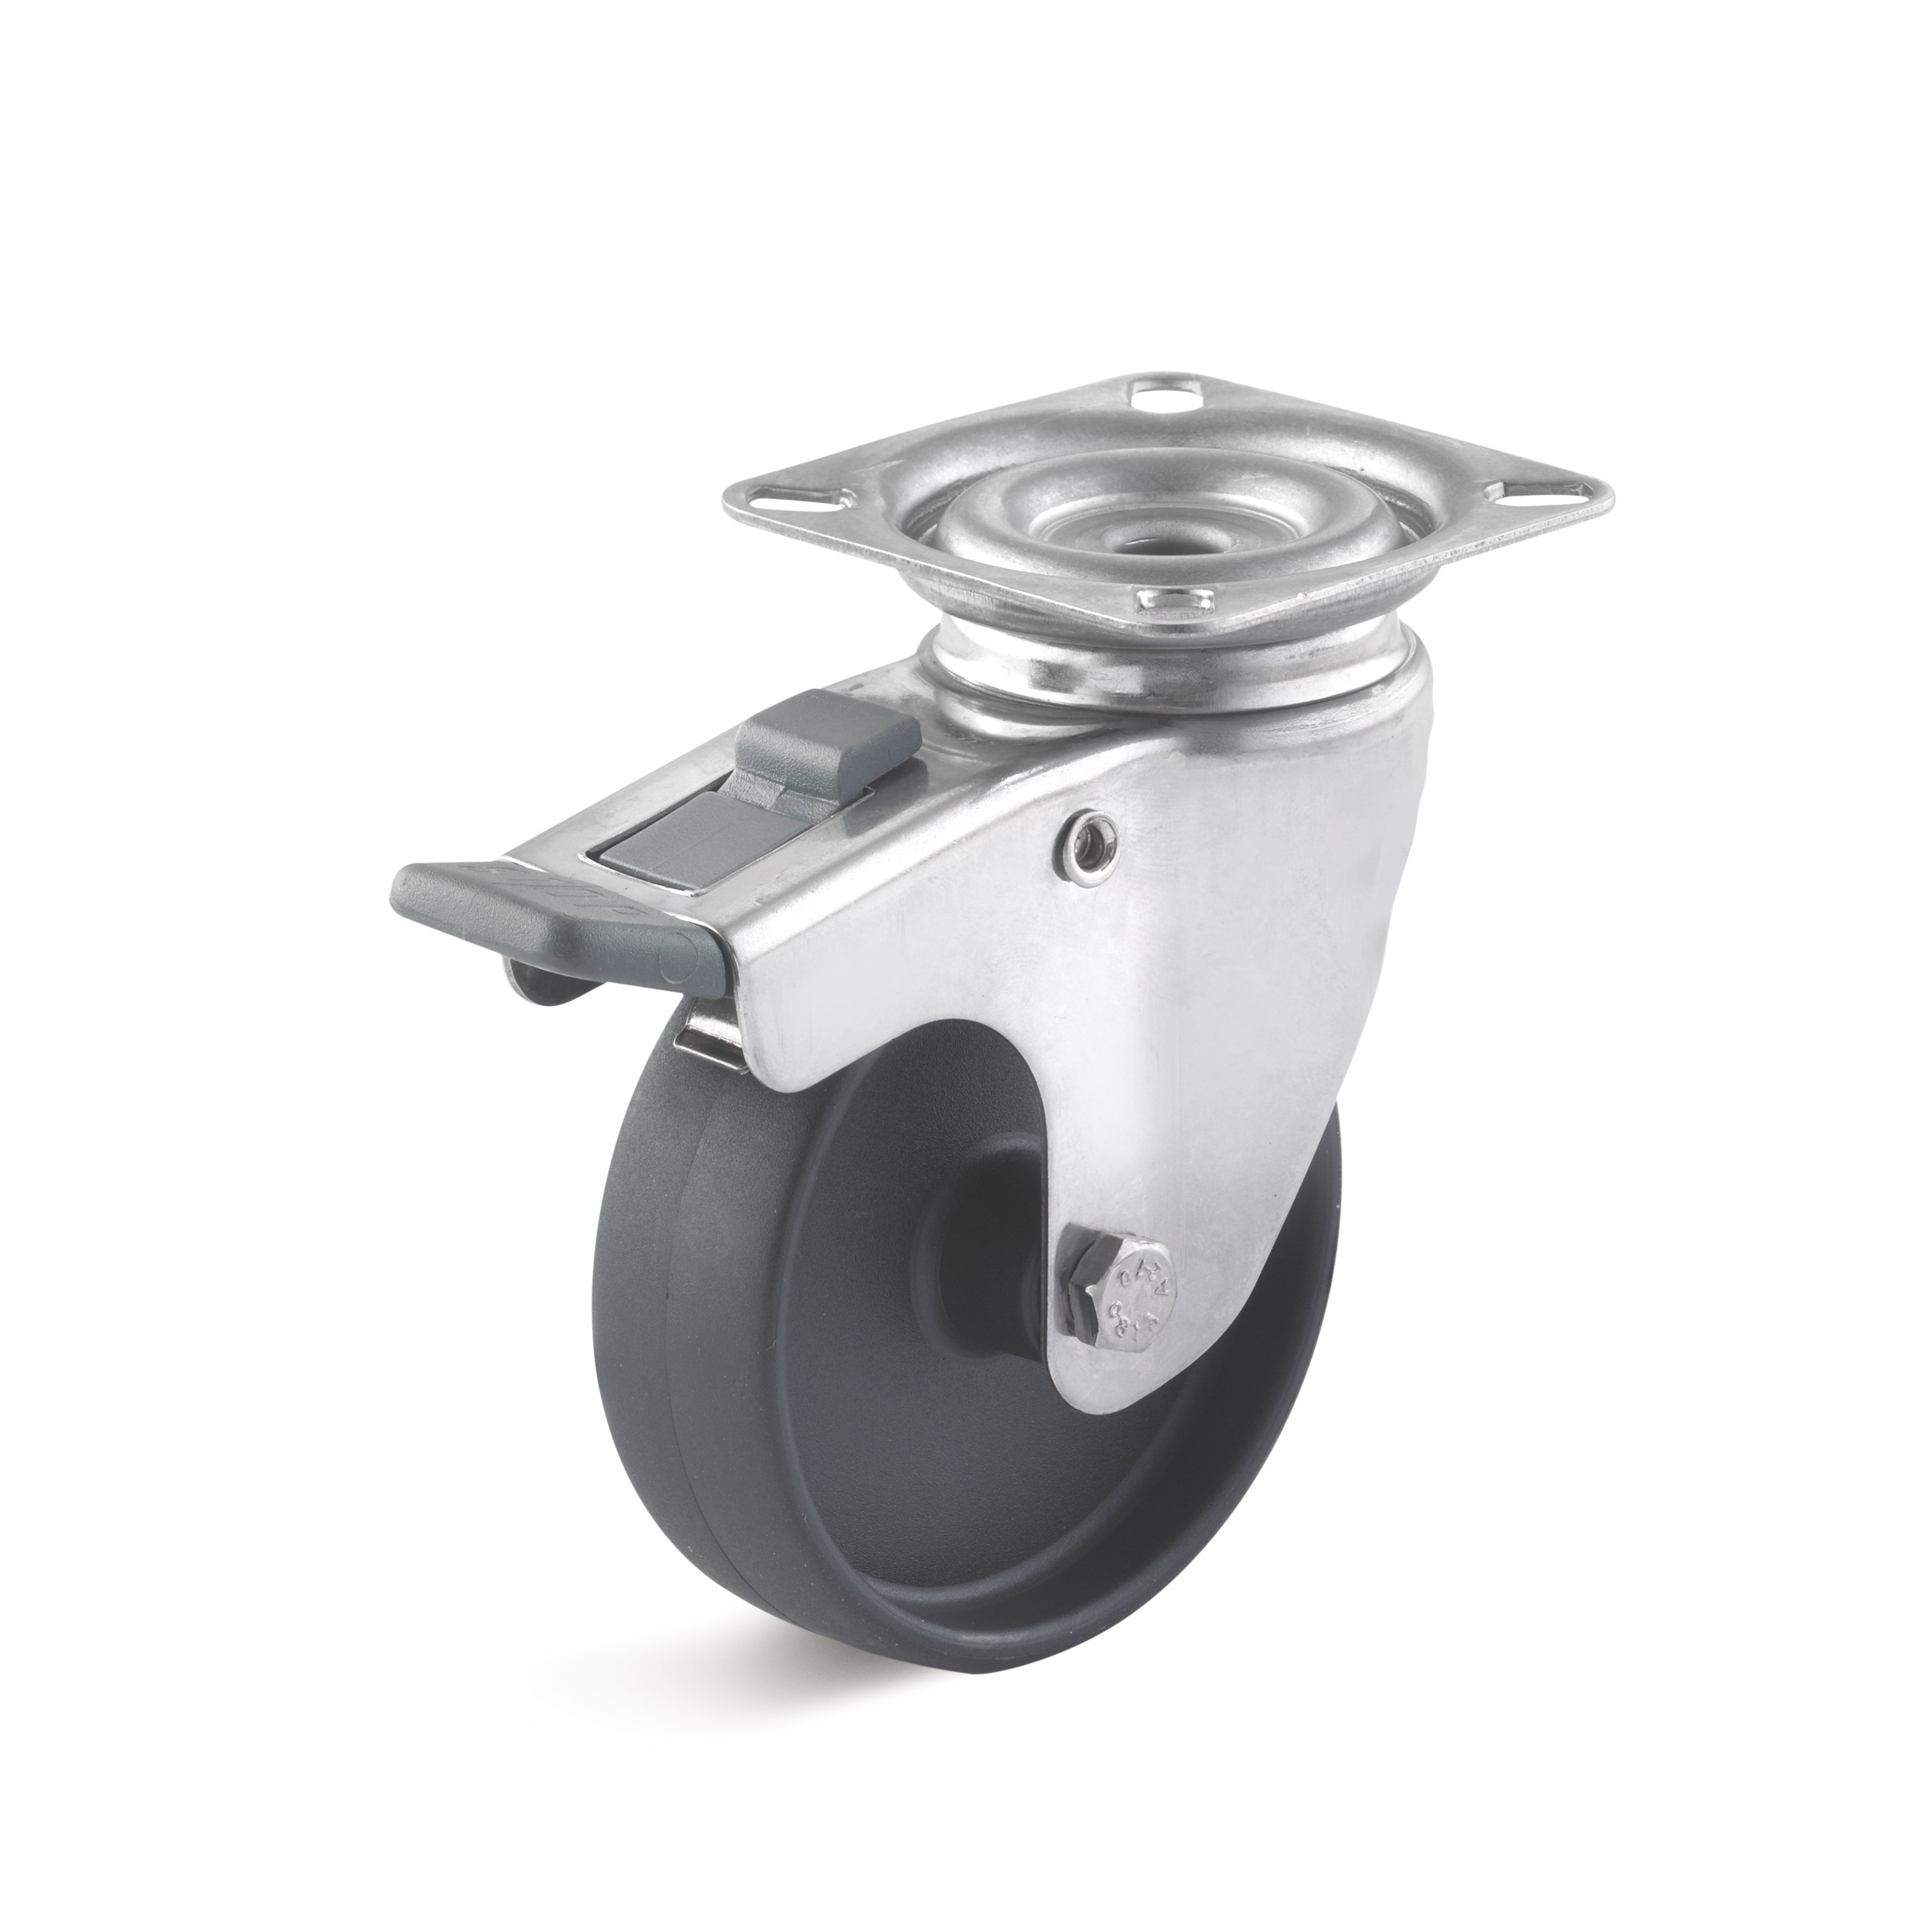 Stainless steel swivel castor with plate attachment and double stop, polyamide wheel